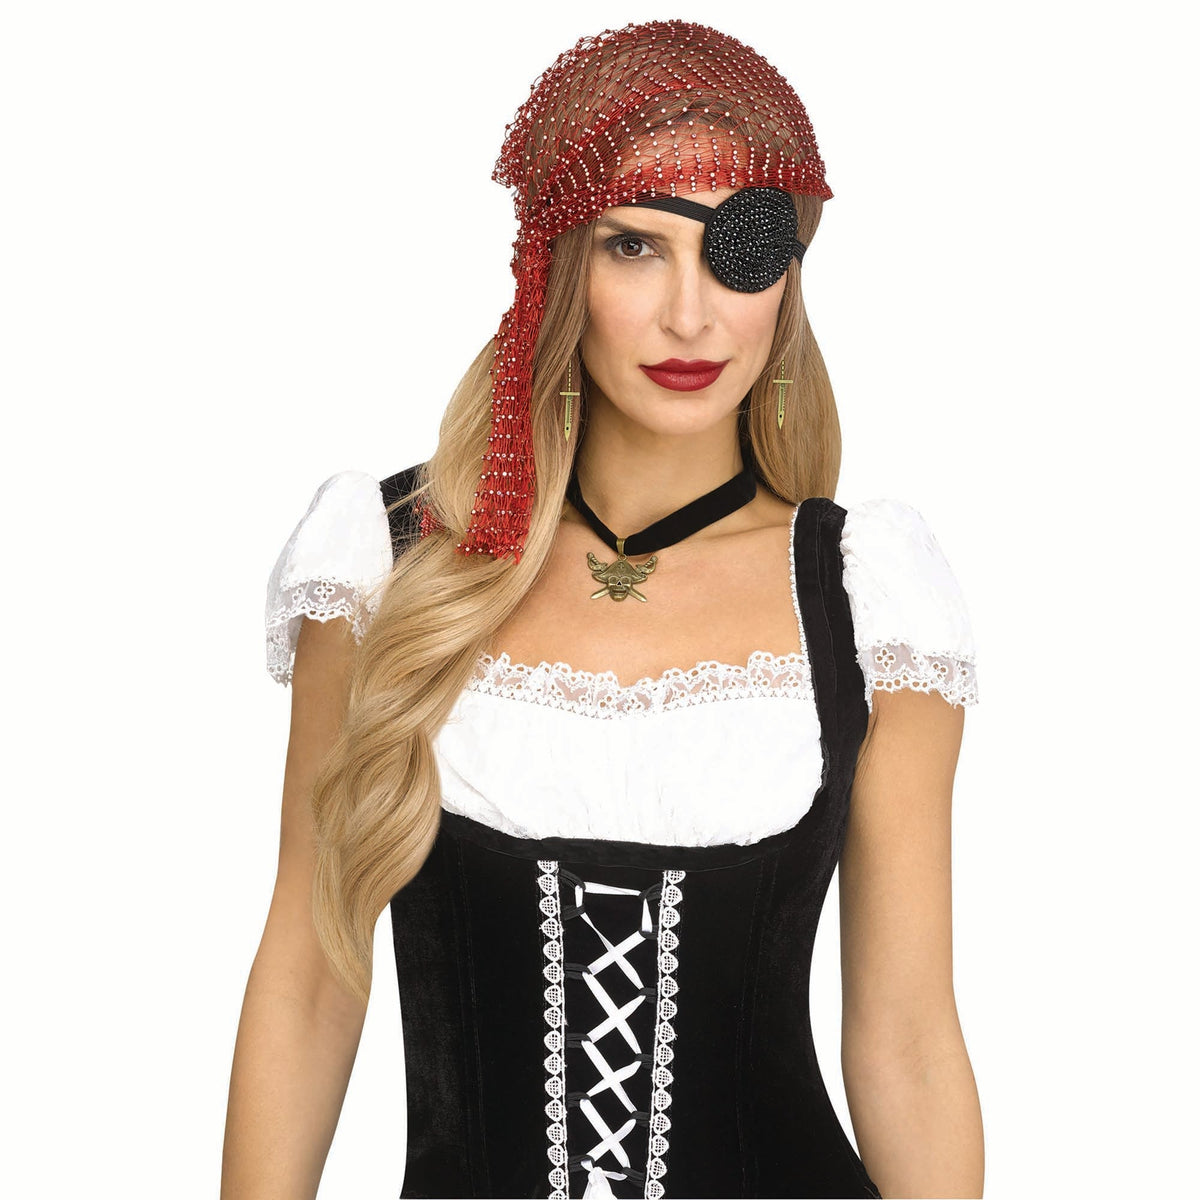 FUN WORLD Costume Accessories Burgundy Bling Pirate Accessory Kit for Adults